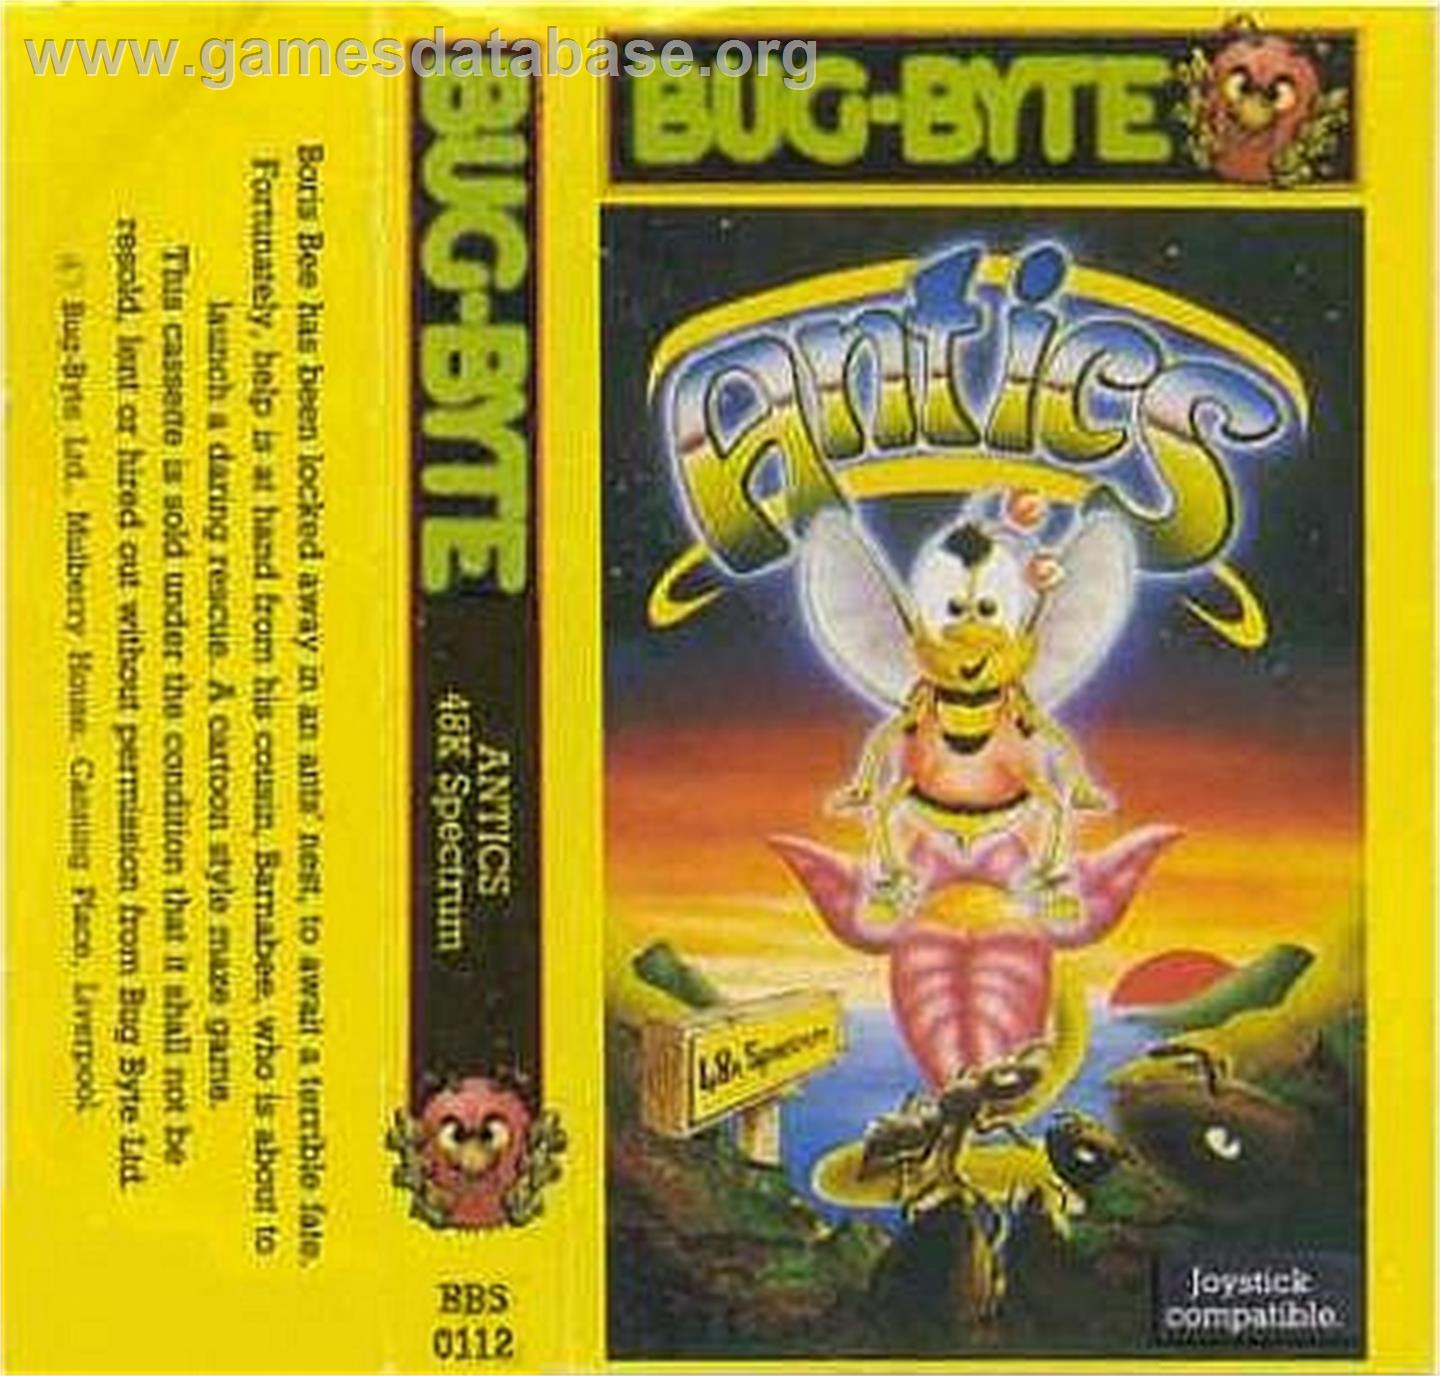 The Birds and the Bees II: Antics - Sinclair ZX Spectrum - Artwork - Box